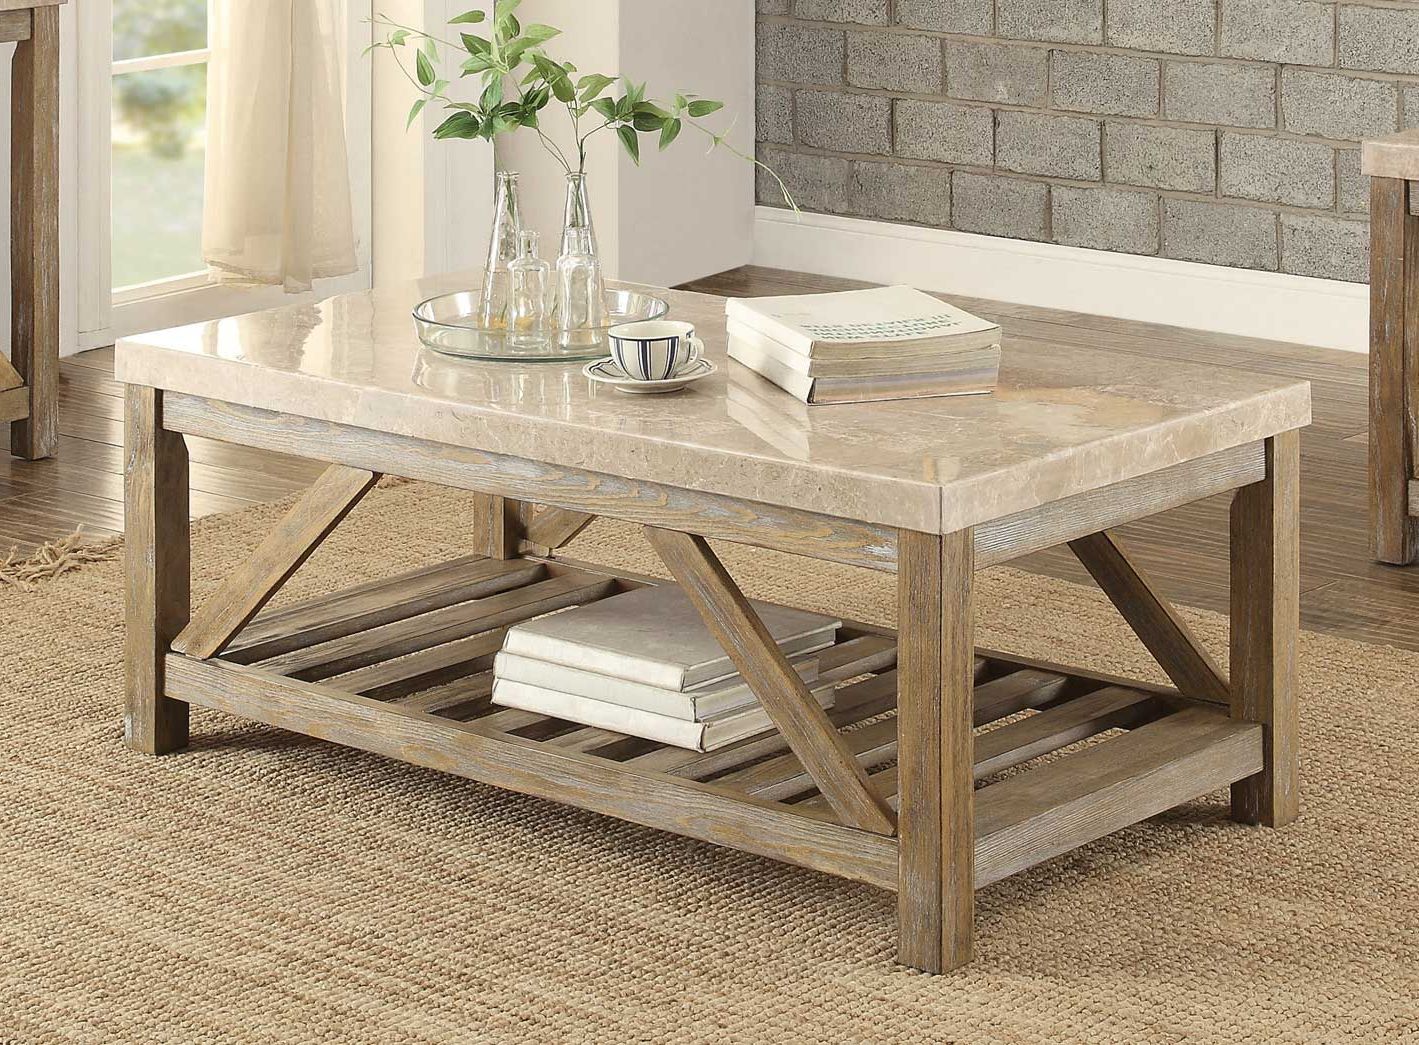 Well Liked Homelegance Ridley Cocktail/coffee Table Set – Weathered Within Square Weathered White Wood Coffee Tables (View 4 of 20)